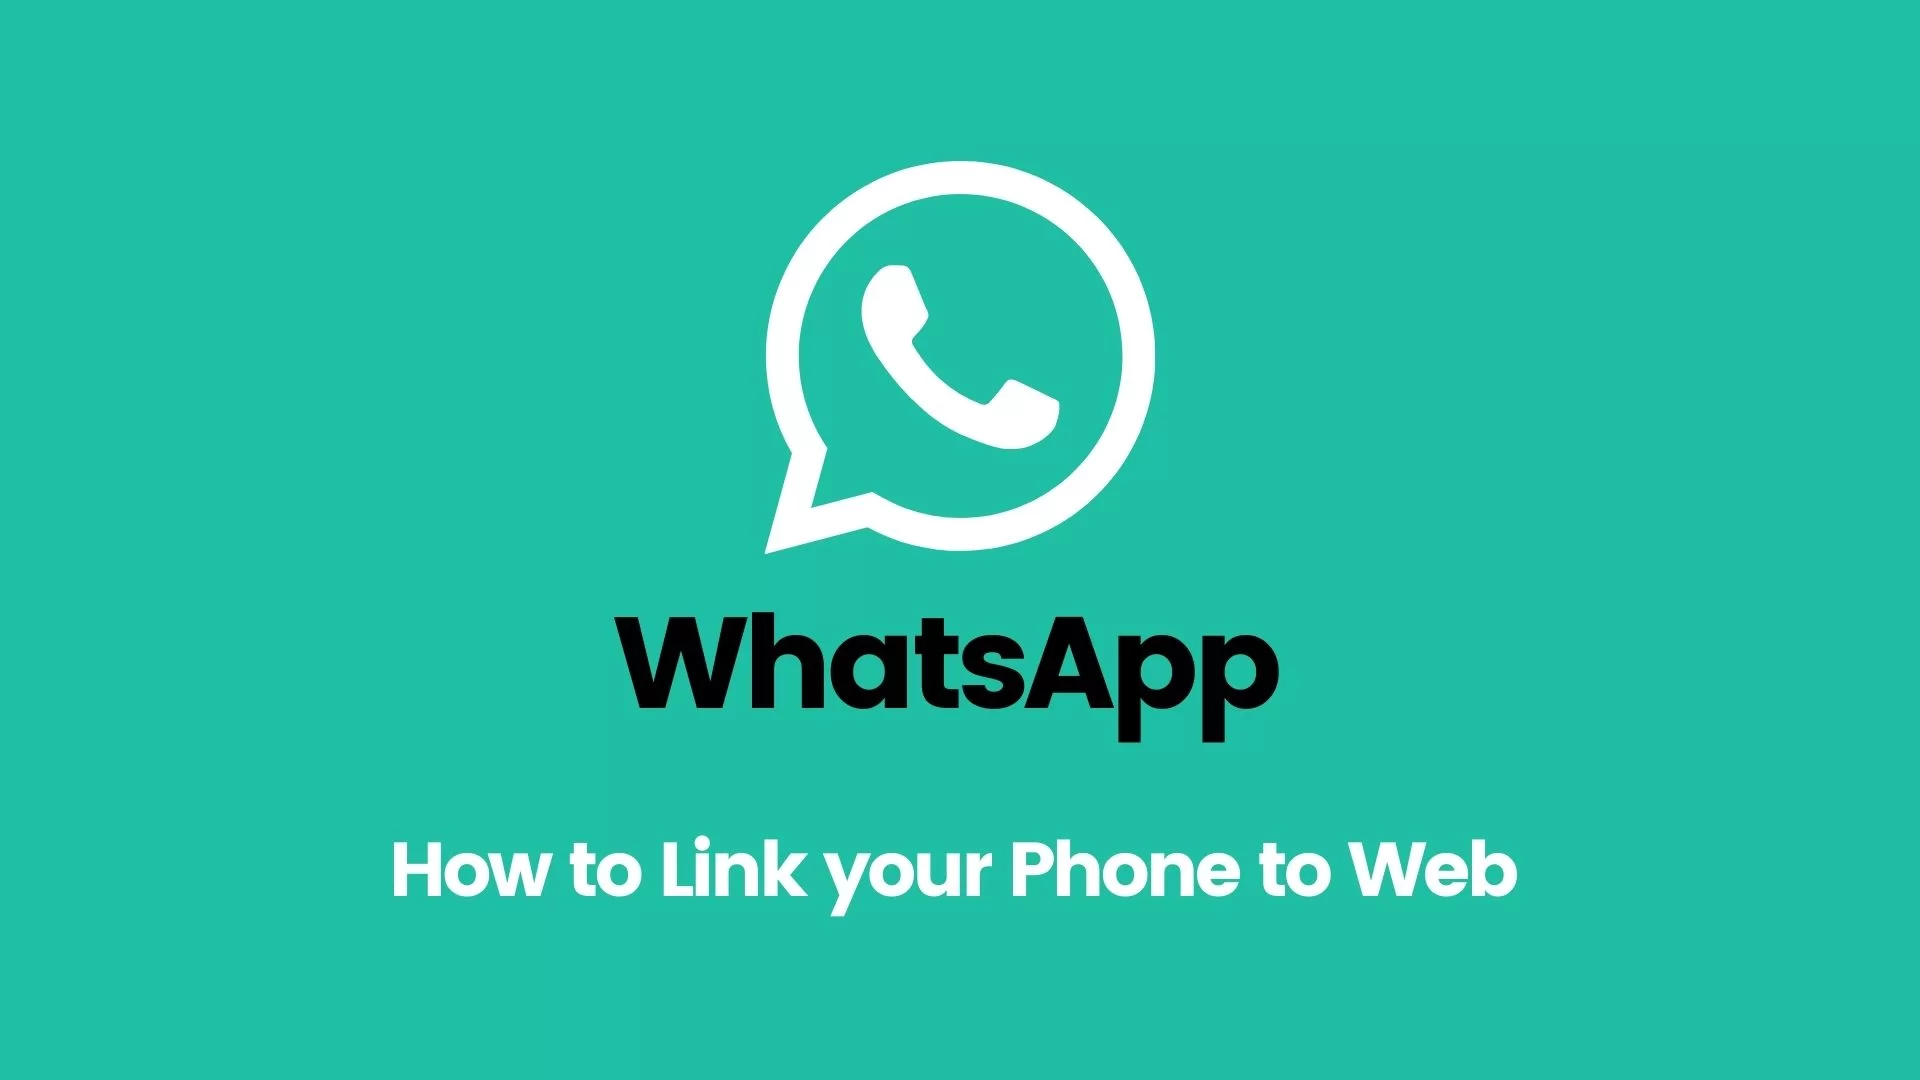 WhatsApp Web Features